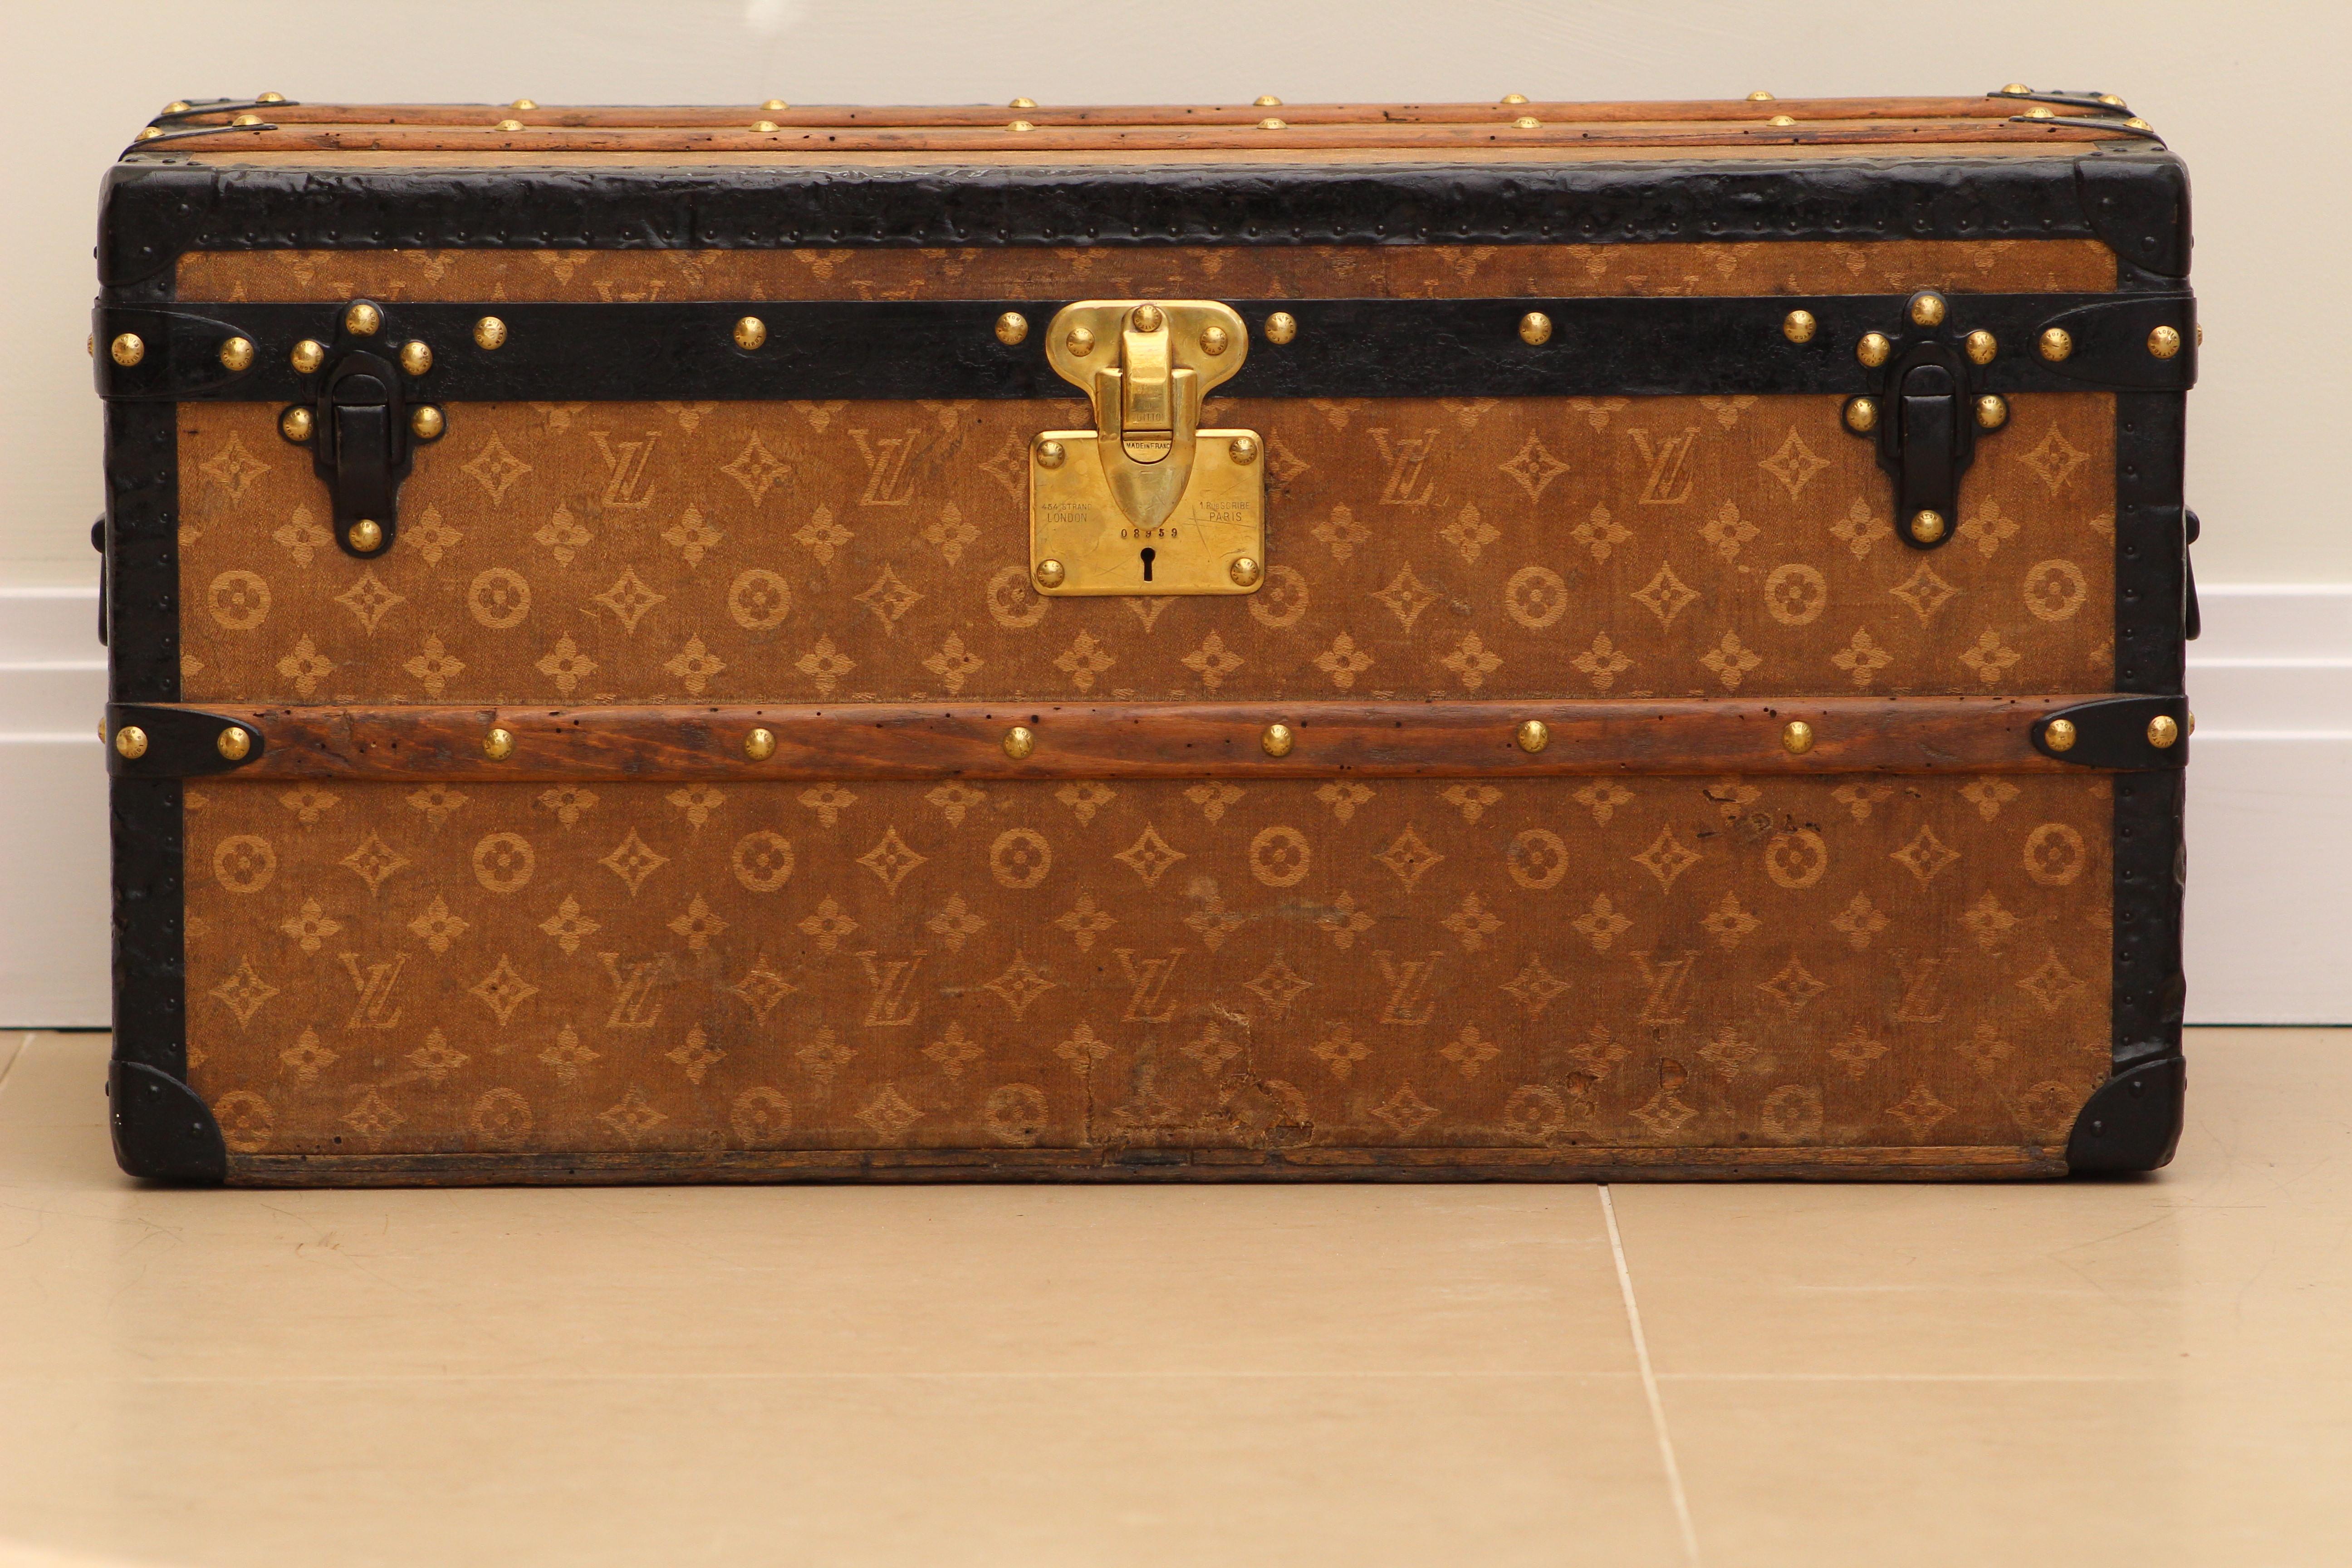 The 1900s Louis Vuitton Monogram Shoe Trunk is a stunning testament to an era when travel and luxury intertwined seamlessly. This exquisite piece embodies the essence of meticulous craftsmanship and timeless design, hallmarks of the iconic Louis